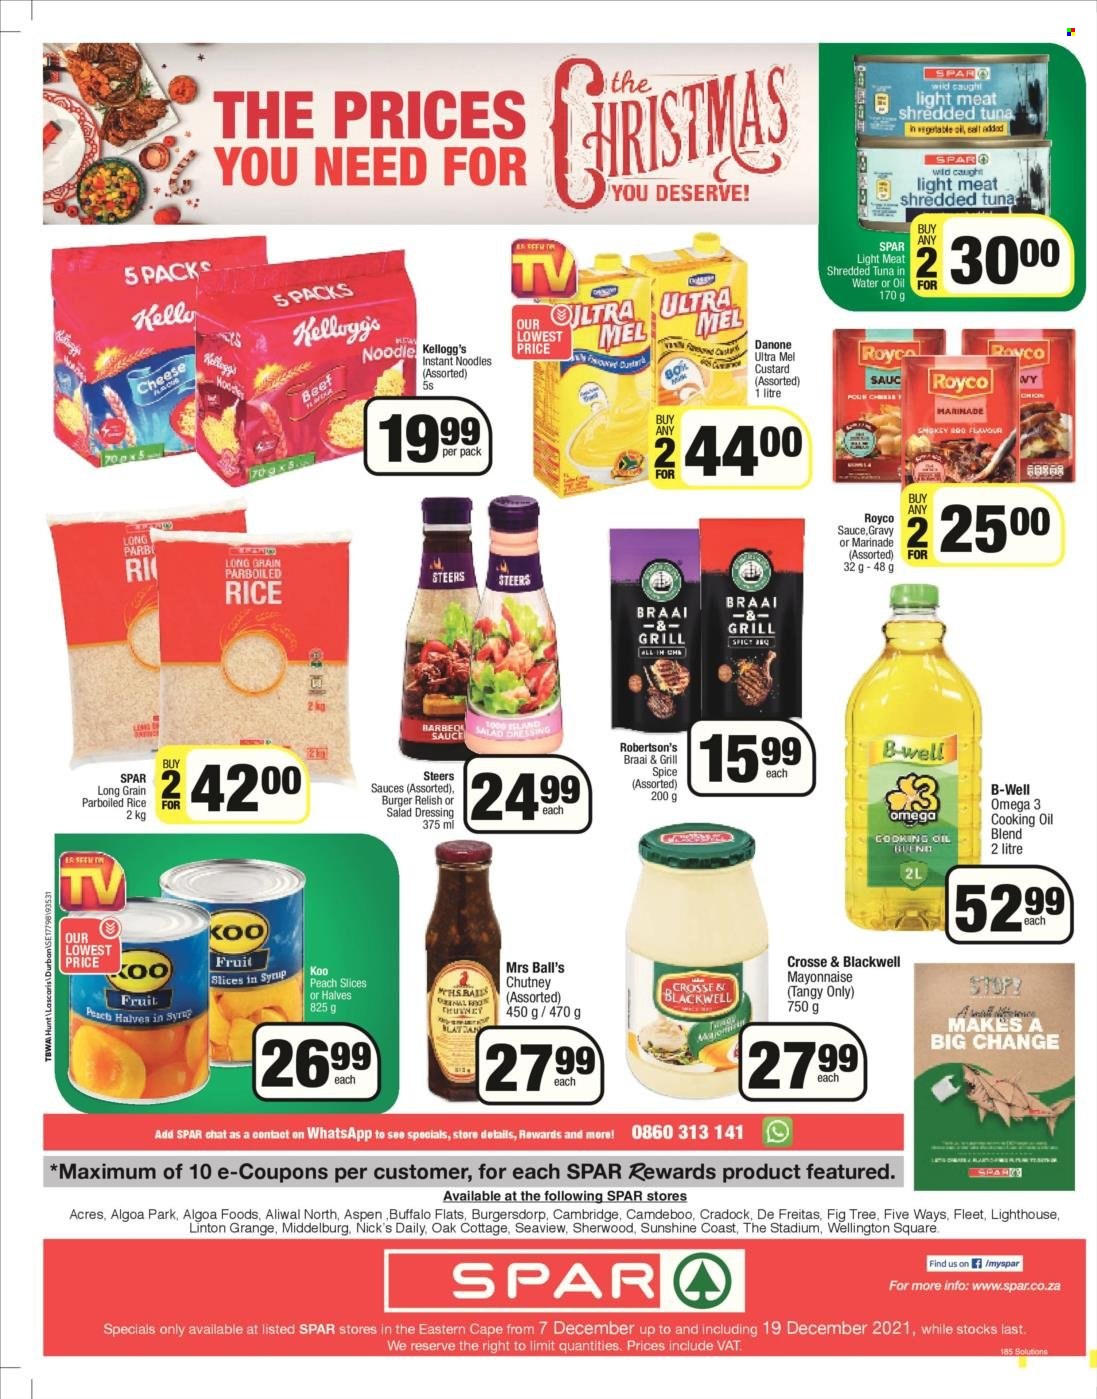 SPAR catalogue  - 07/12/2021 - 19/12/2021 - Sales products - tuna, instant noodles, noodles, custard, Danone, Sunshine, mayonnaise, Kellogg's, salt, tuna in water, Koo, rice, parboiled rice, spice, salad dressing, dressing, marinade, chutney, Omega-3. Page 8.